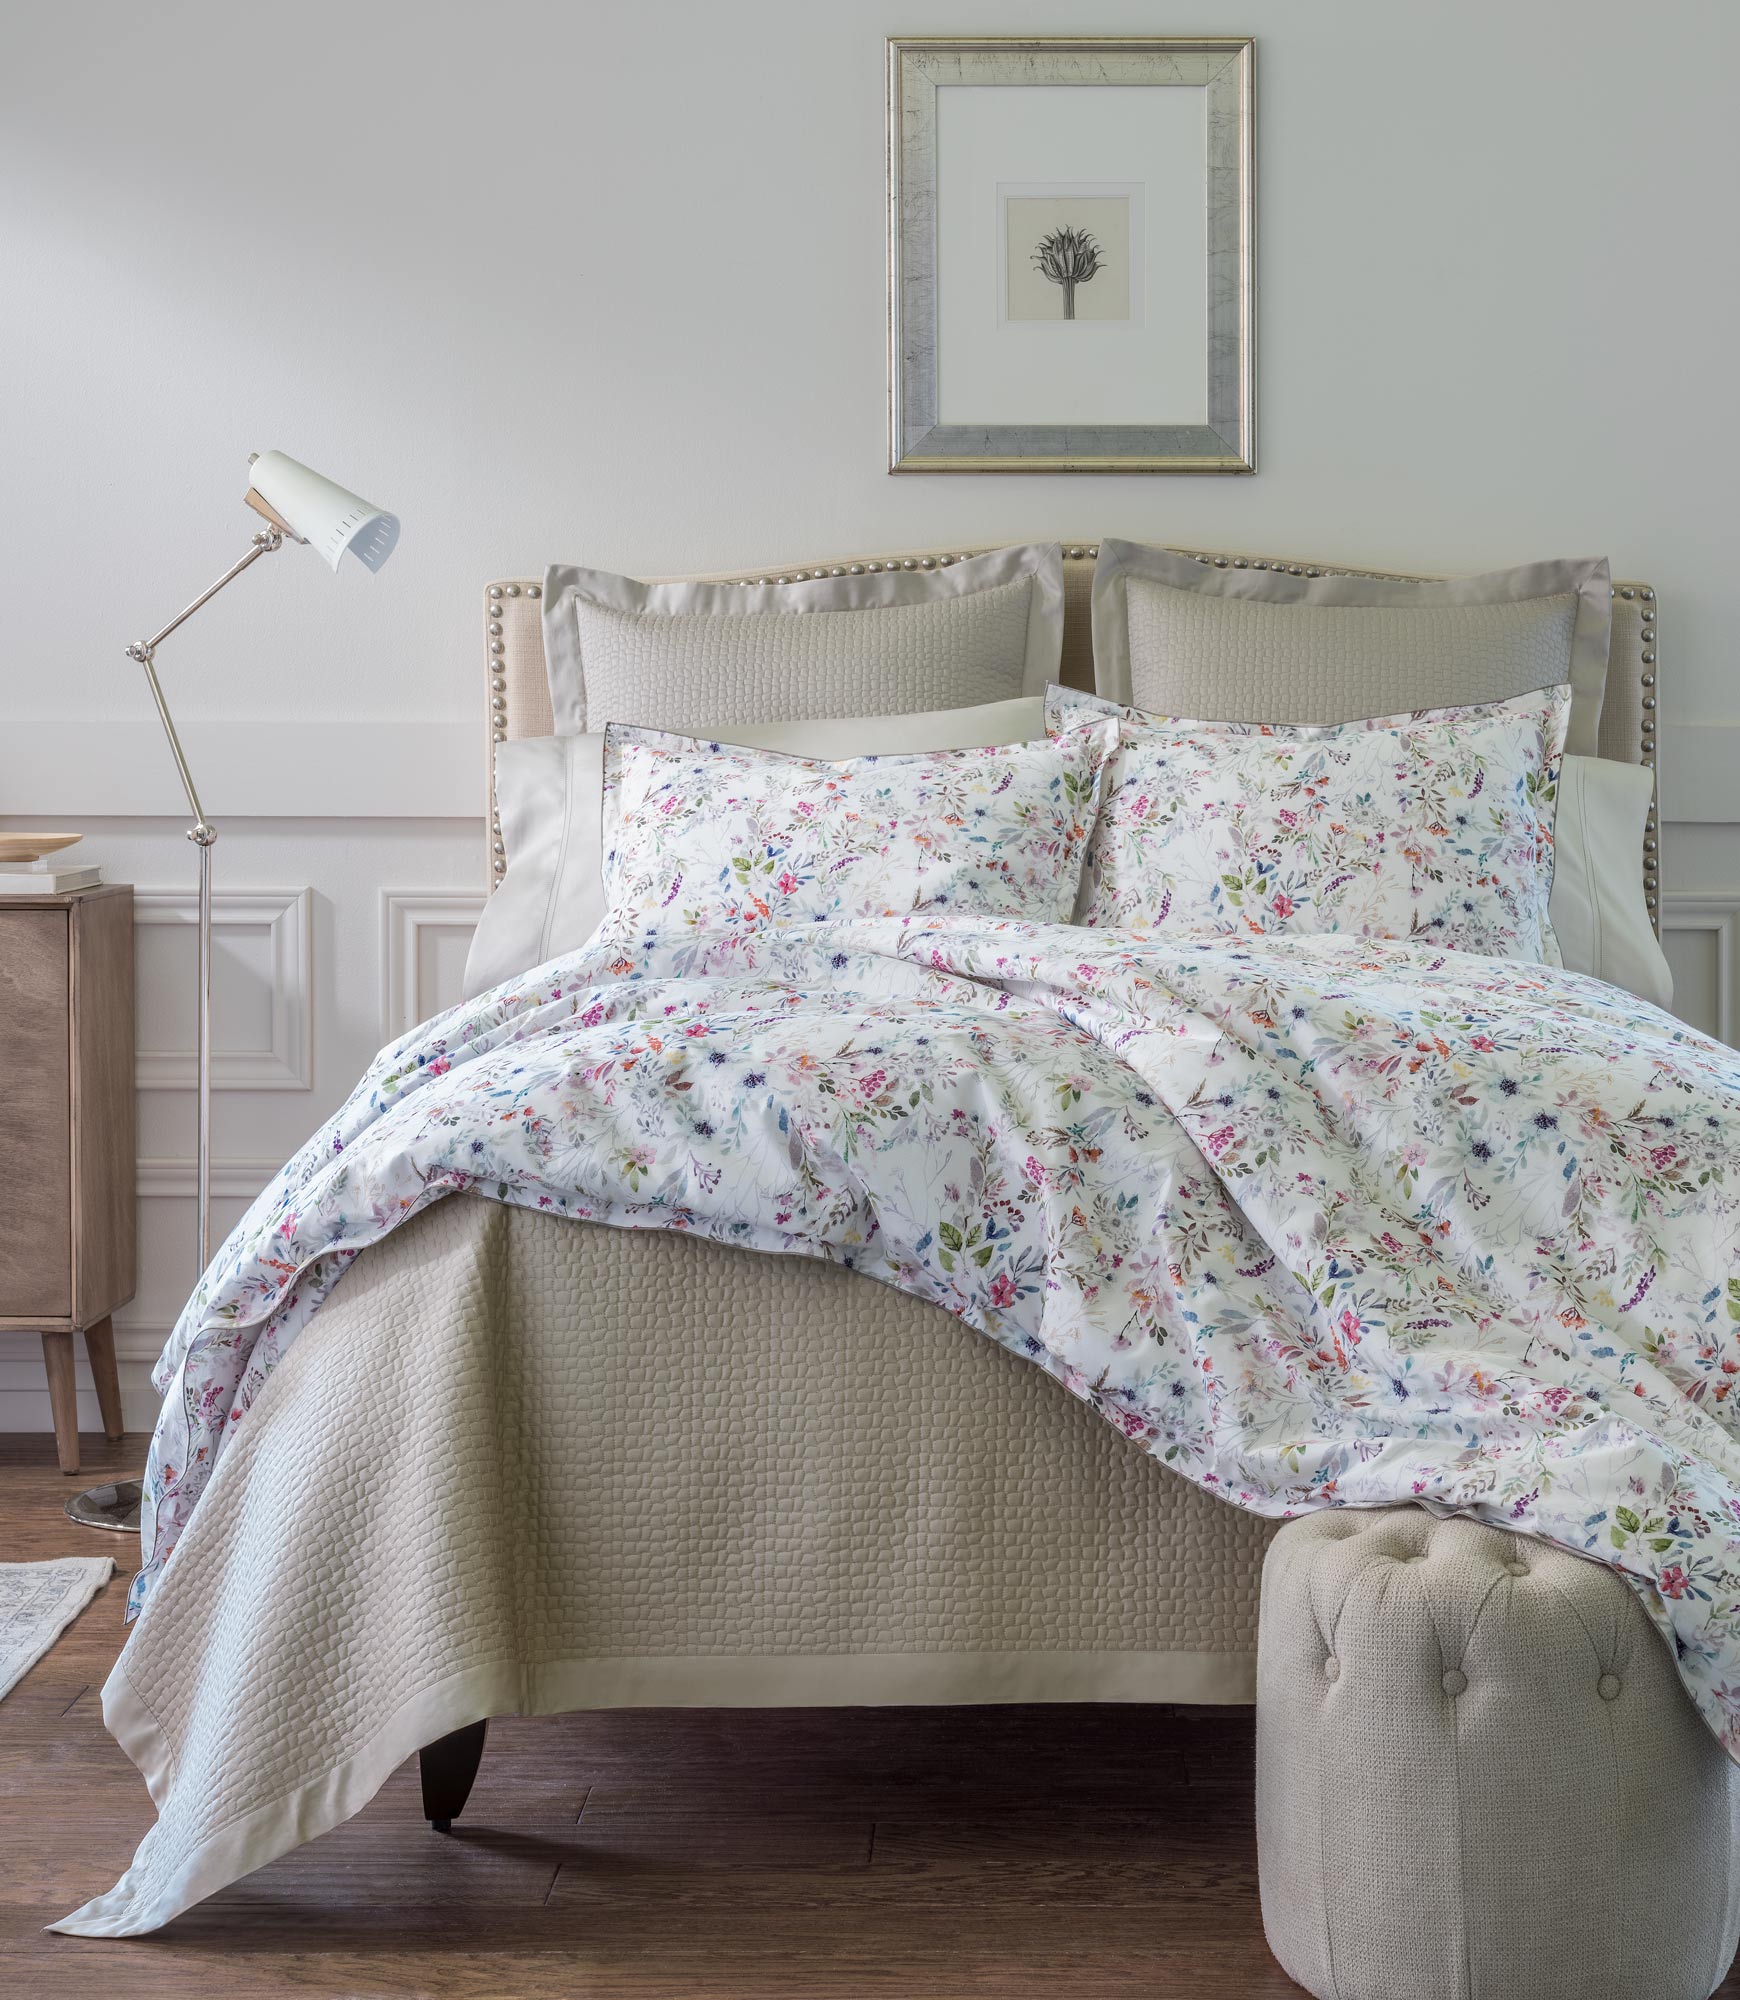 Chloe Floral Percale Duvet Cover and Shams on Bed in Bedroom